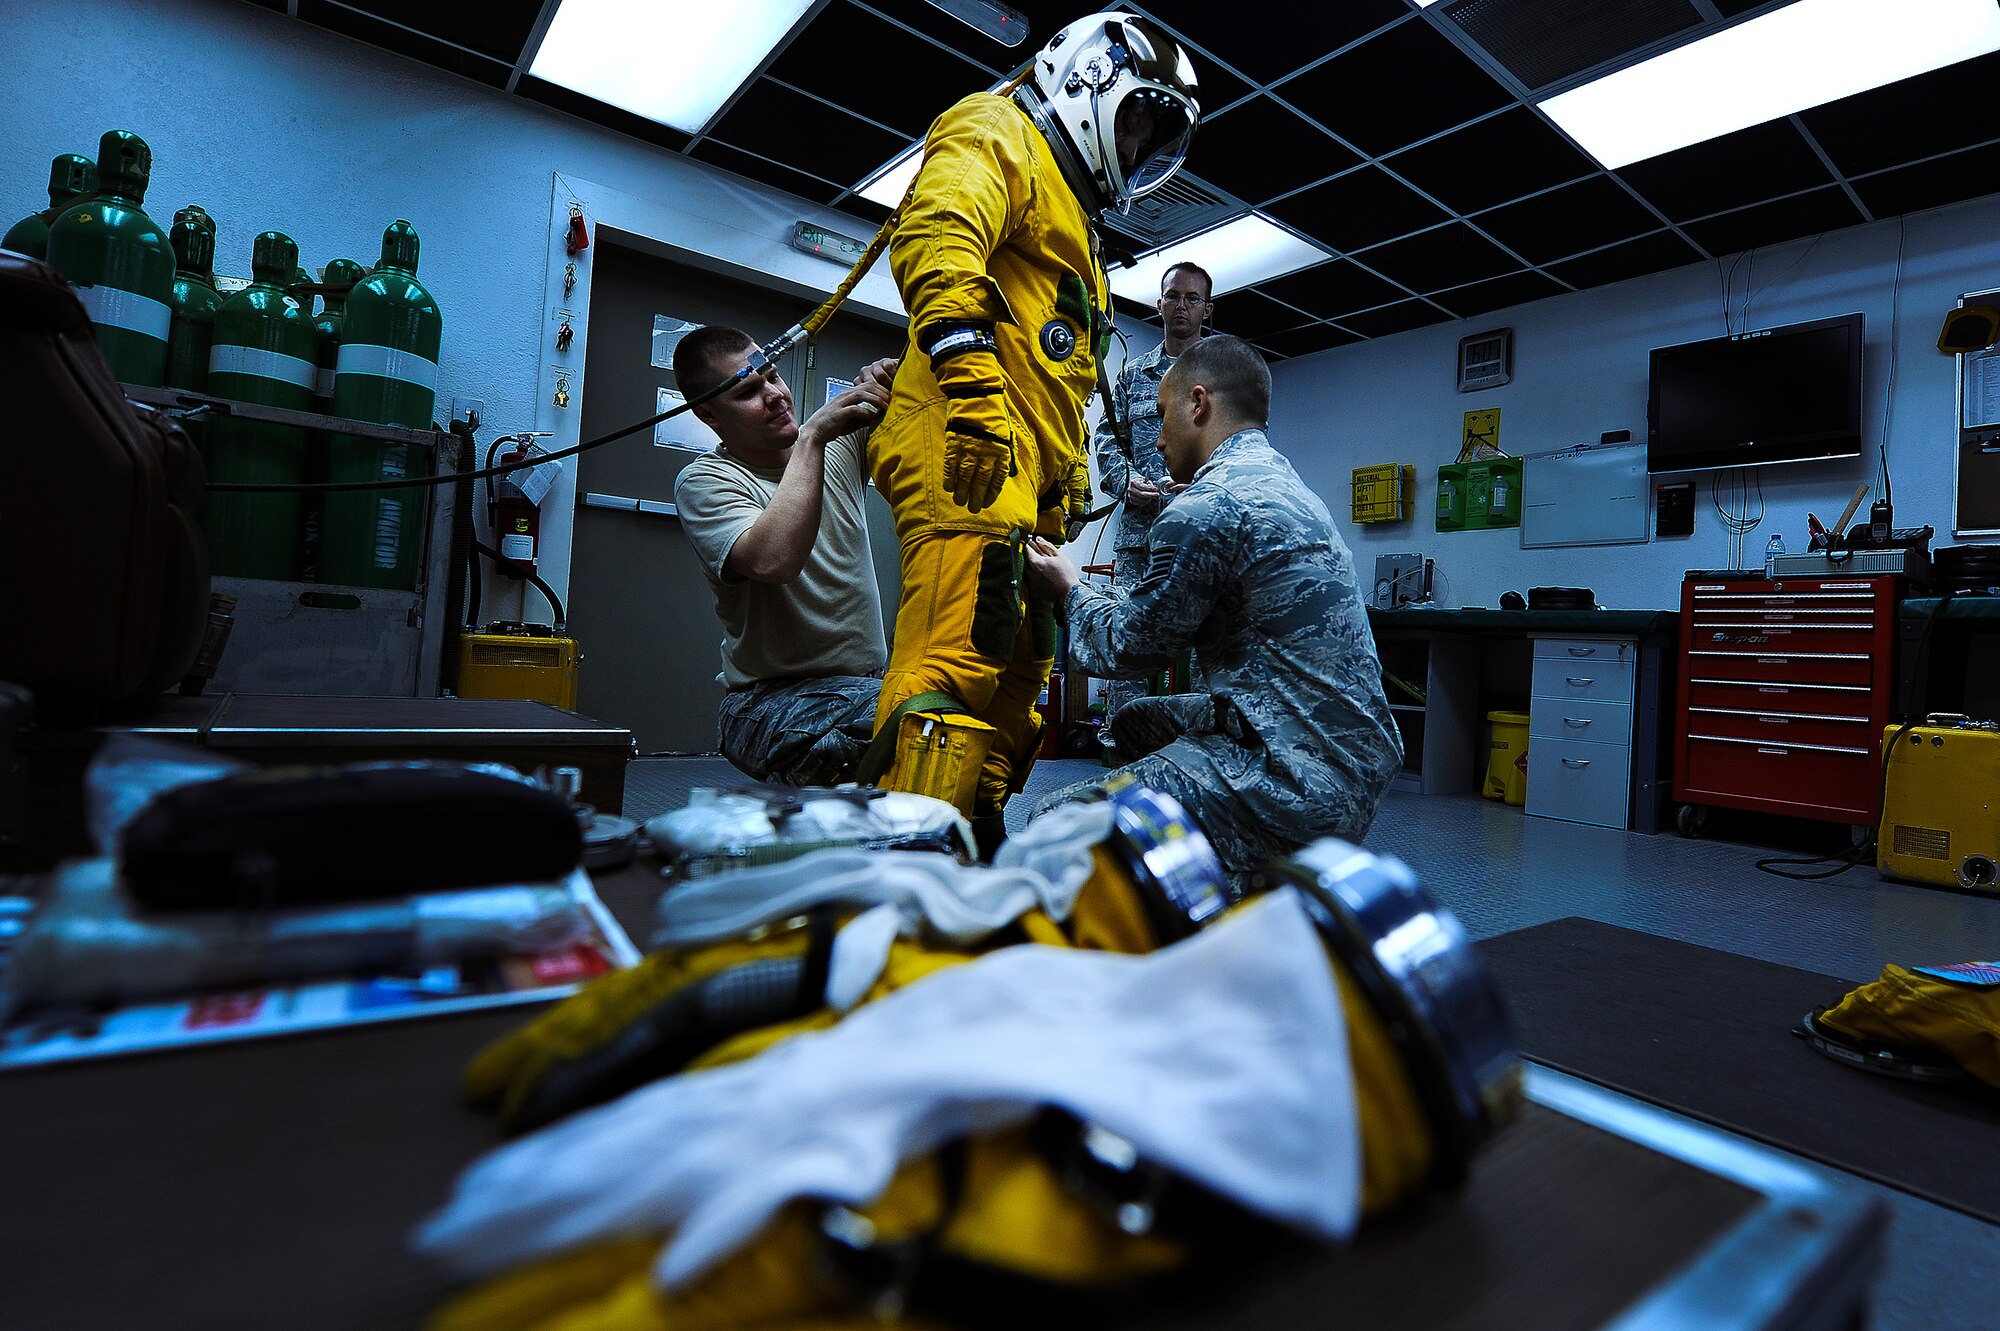 Physiological support technicians with the 99th Expeditionary Reconnaissance Squadron help Lt. Col Jeff Klosky don his high altitude full pressure suit before flight April 20, 2014, in Southwest Asia. The full pressure suit provides protection to Klosky and other U-2 pilot, at extreme high altitudes. (U.S. Air Force photo/Tech. Sgt. Russ Scalf)